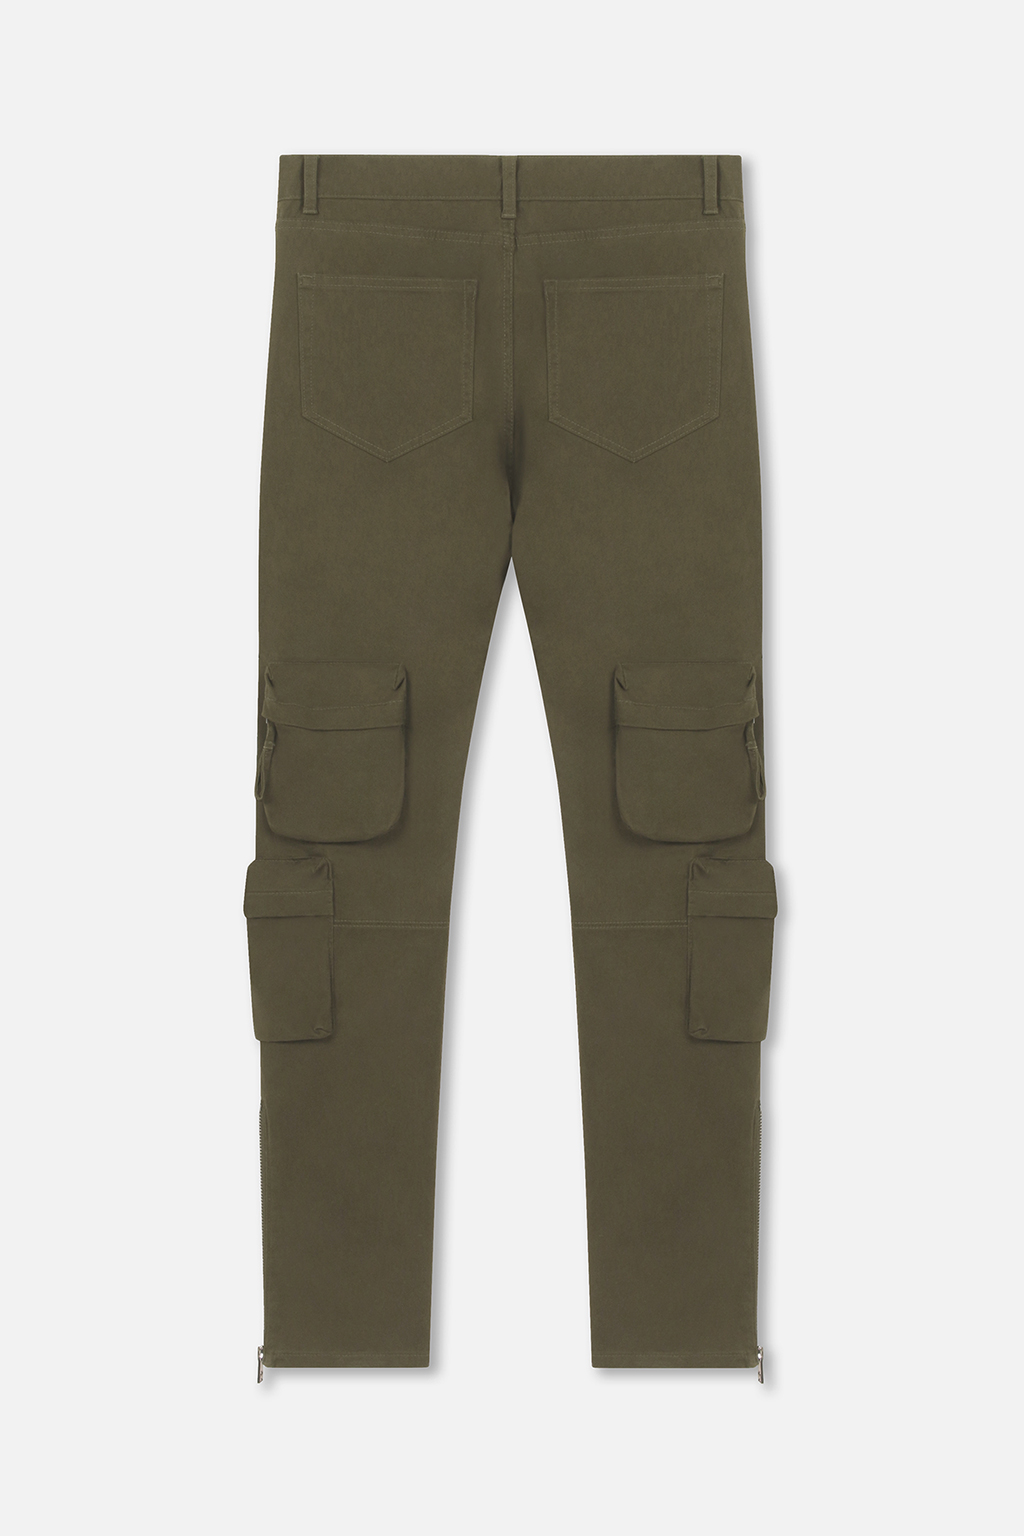 MLVINCE TYPE-2 SLIM CARGO PANTS OLIVE 32-